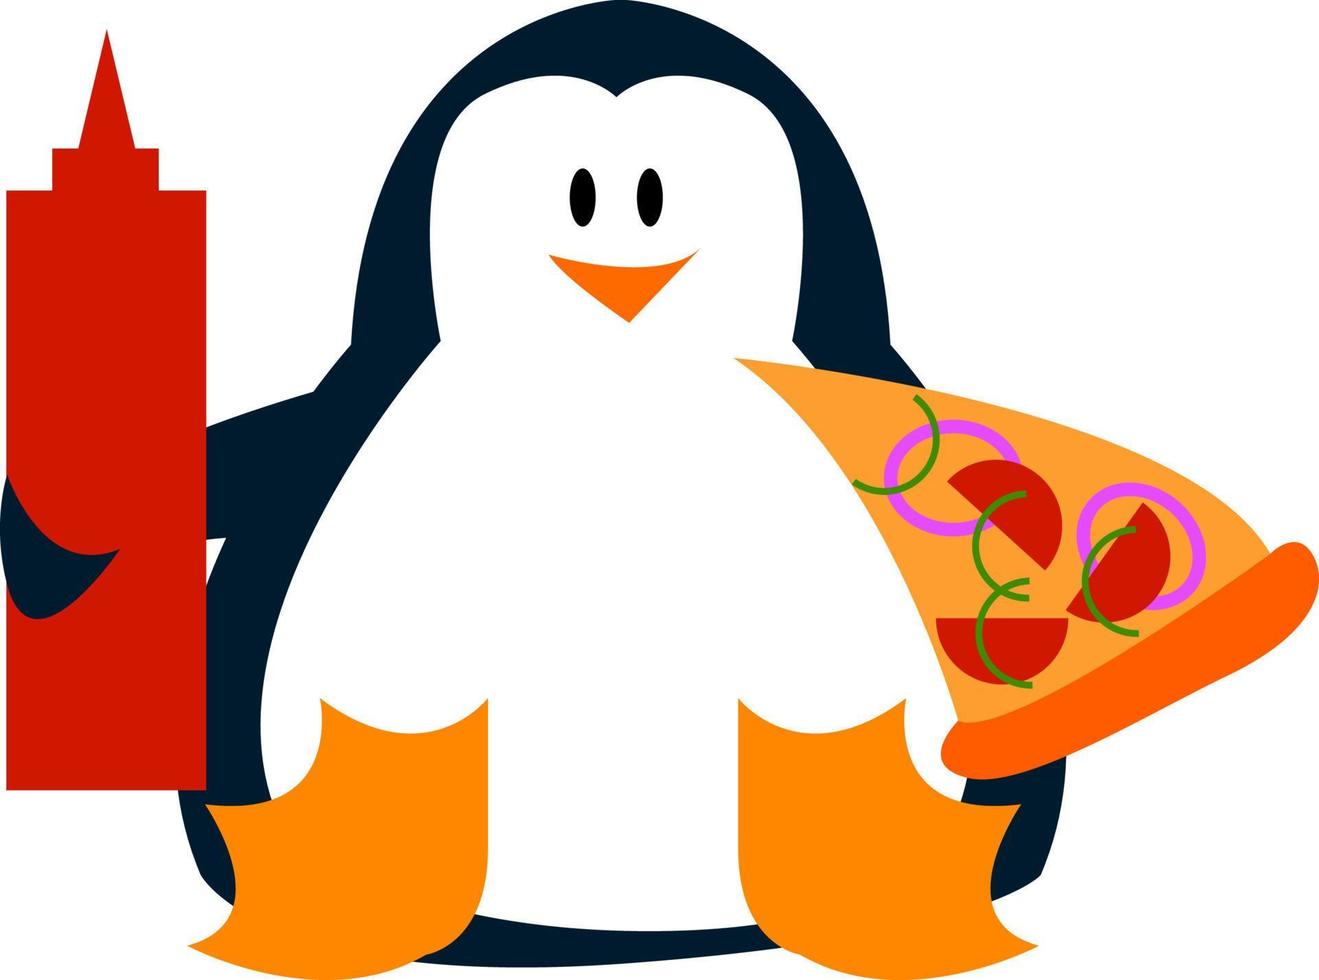 Penguin with pizza, illustration, vector on white background.